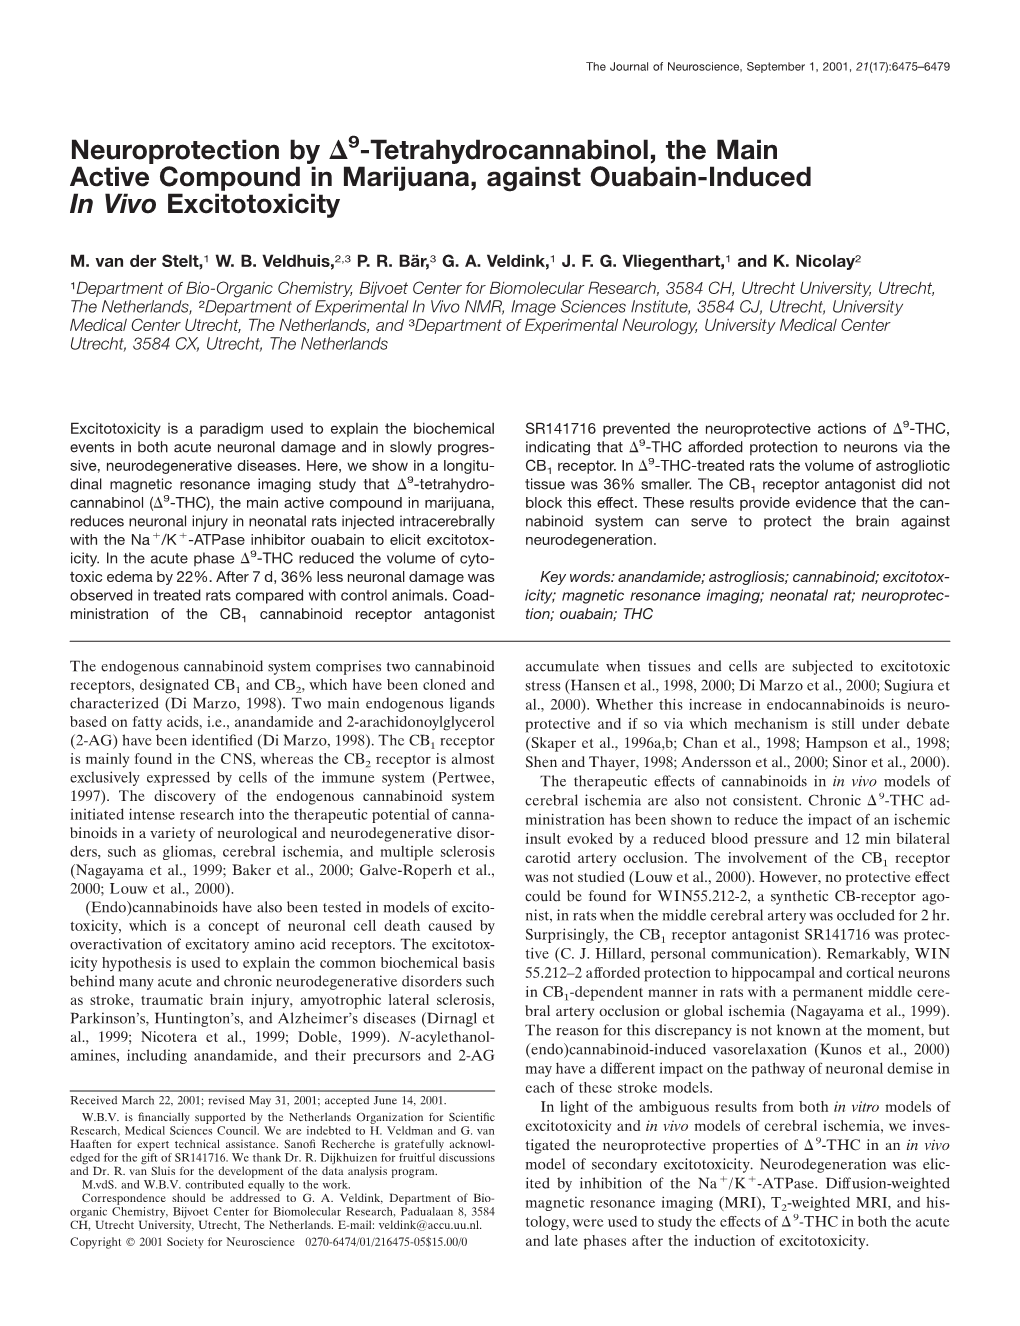 Neuroprotection by Δ9-Tetrahydrocannabinol, the Main Active Compound in Marijuana, Against Ouabain-Induced in Vivo Excitotoxici